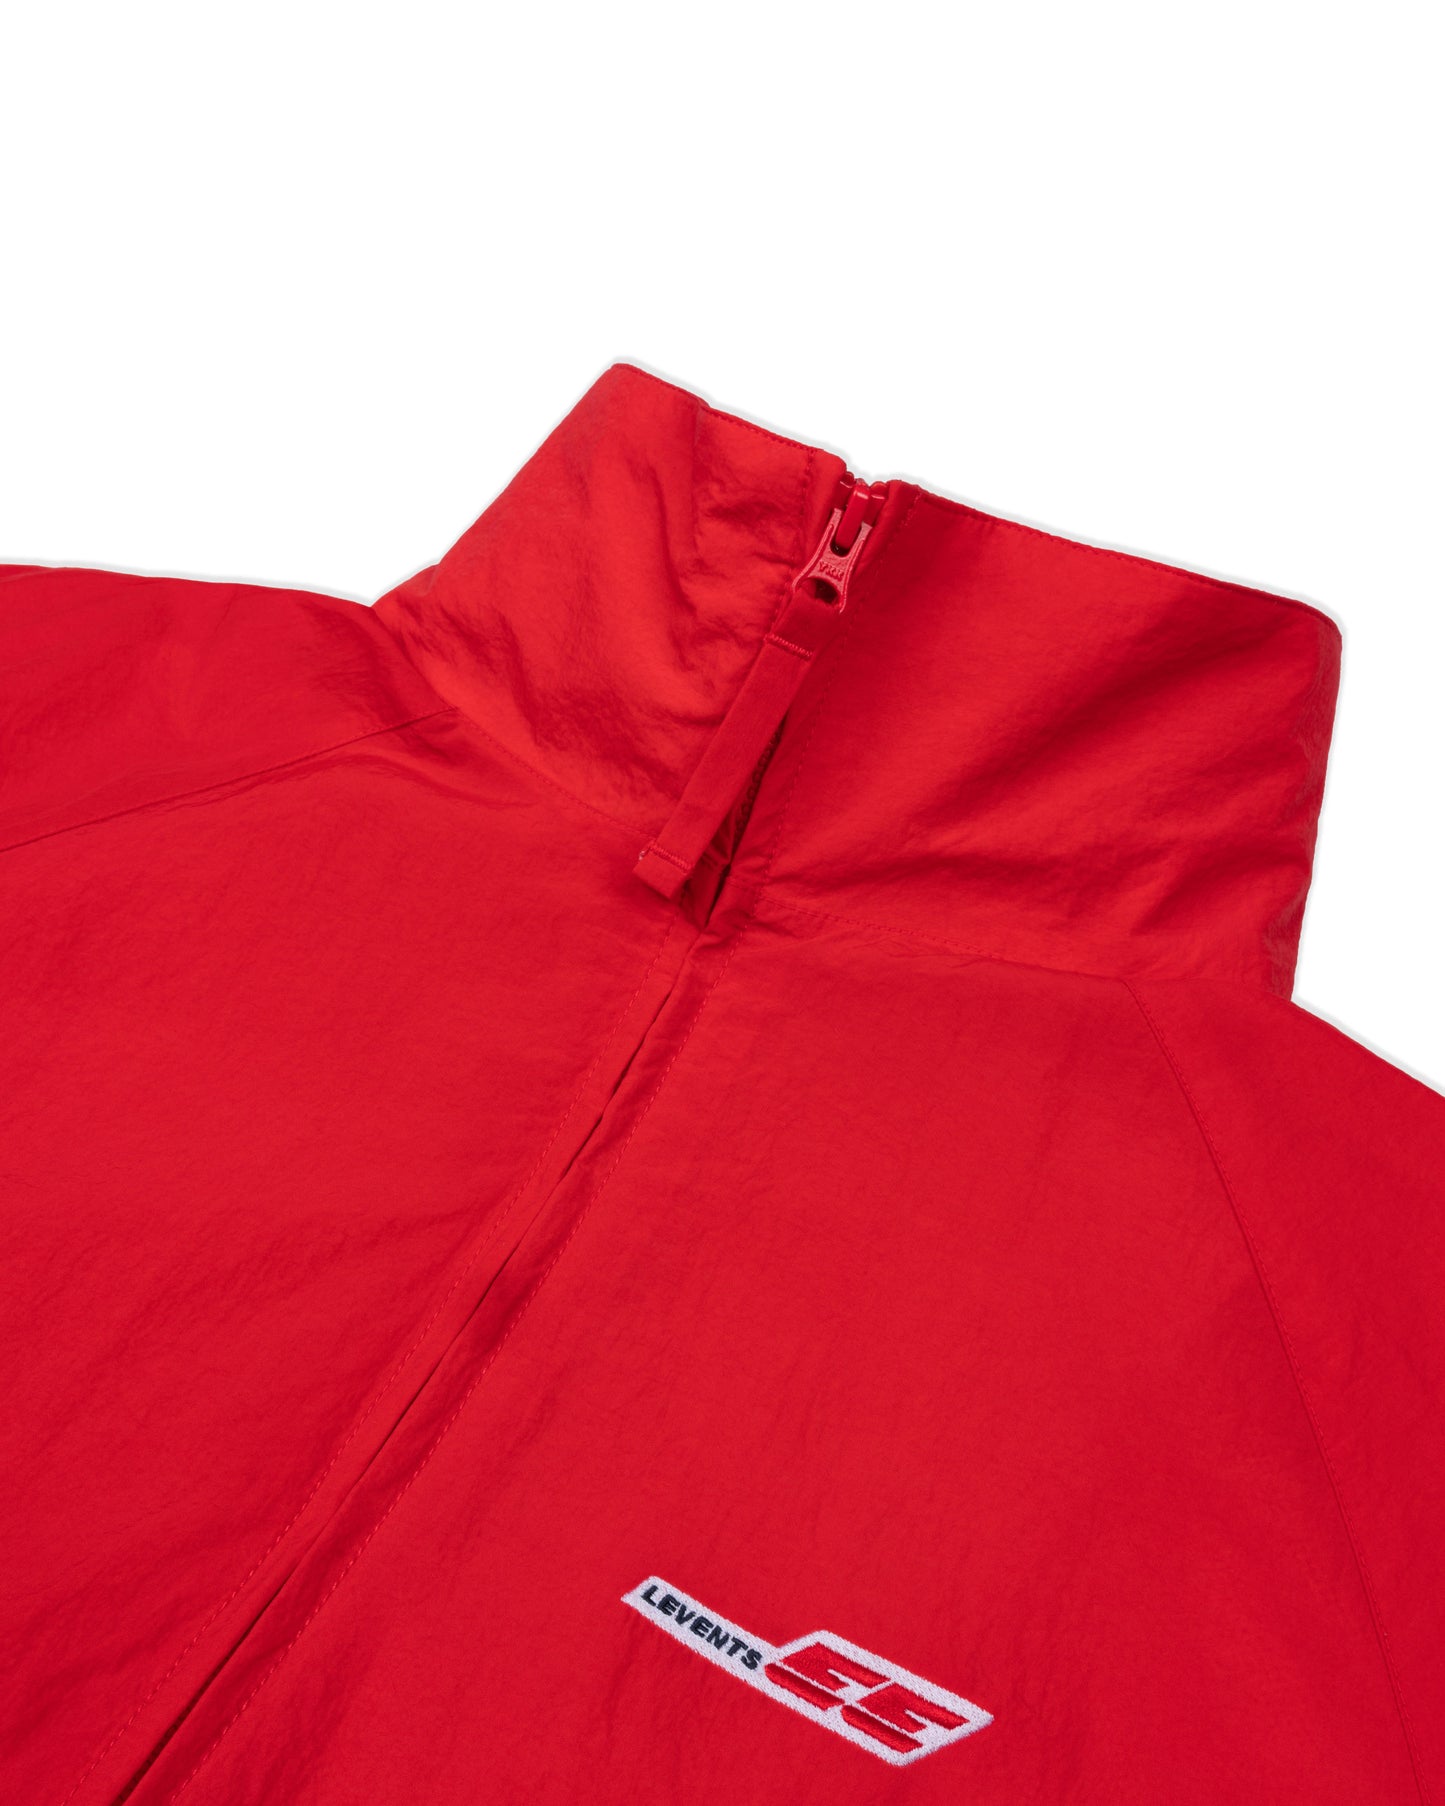 Levents® Sporty Jacket/ Red